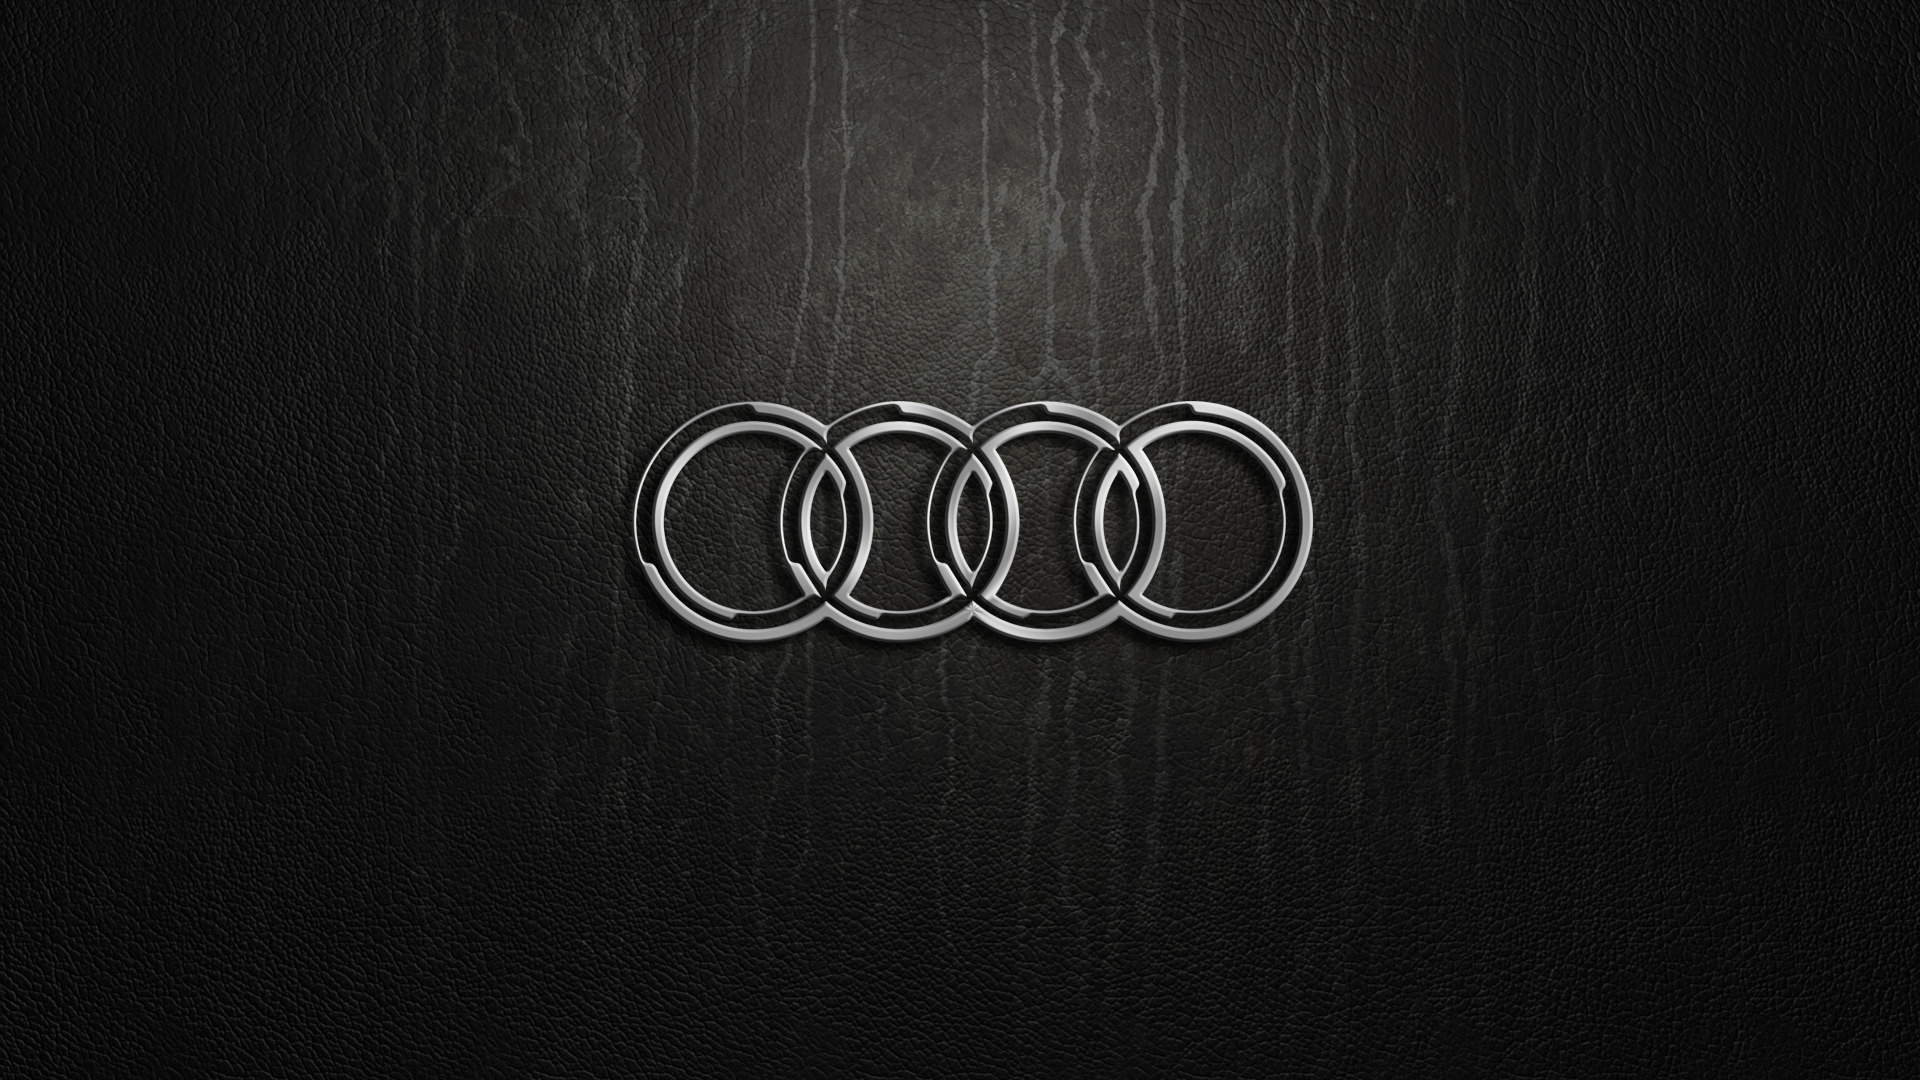 530+ Audi HD Wallpapers and Backgrounds